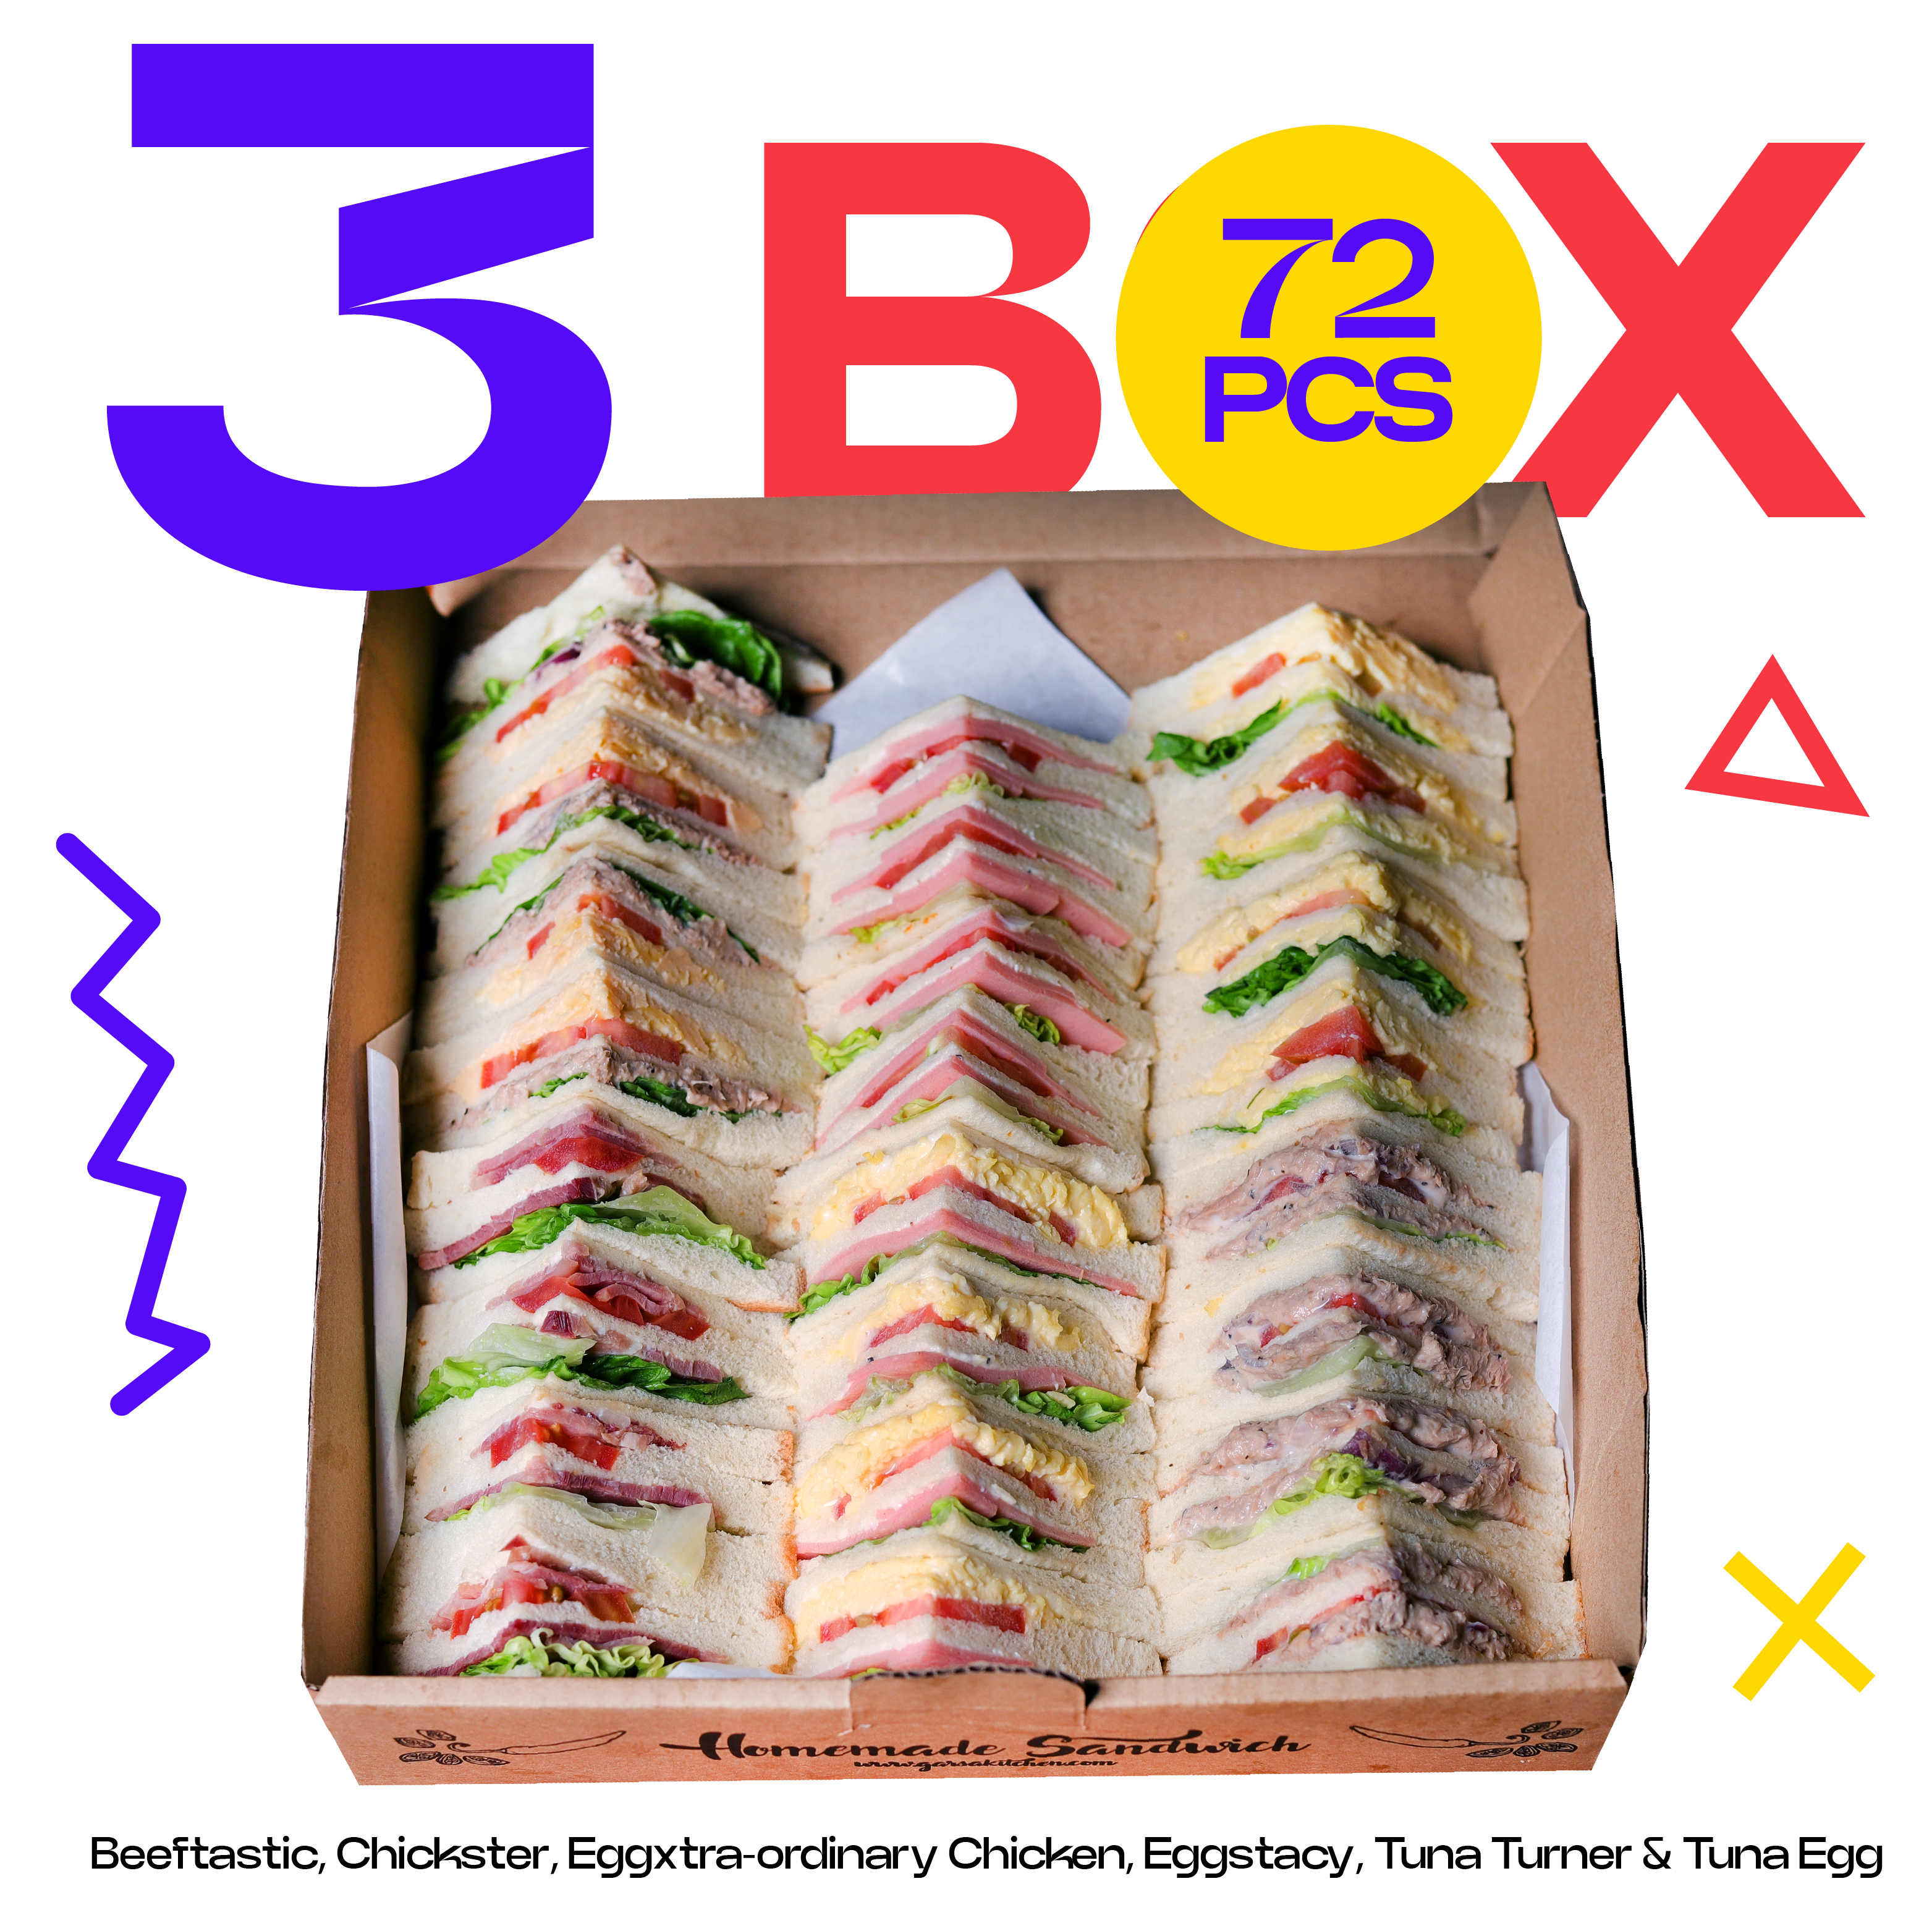 Fiesta 3 box : A classic selection of 6 flavours